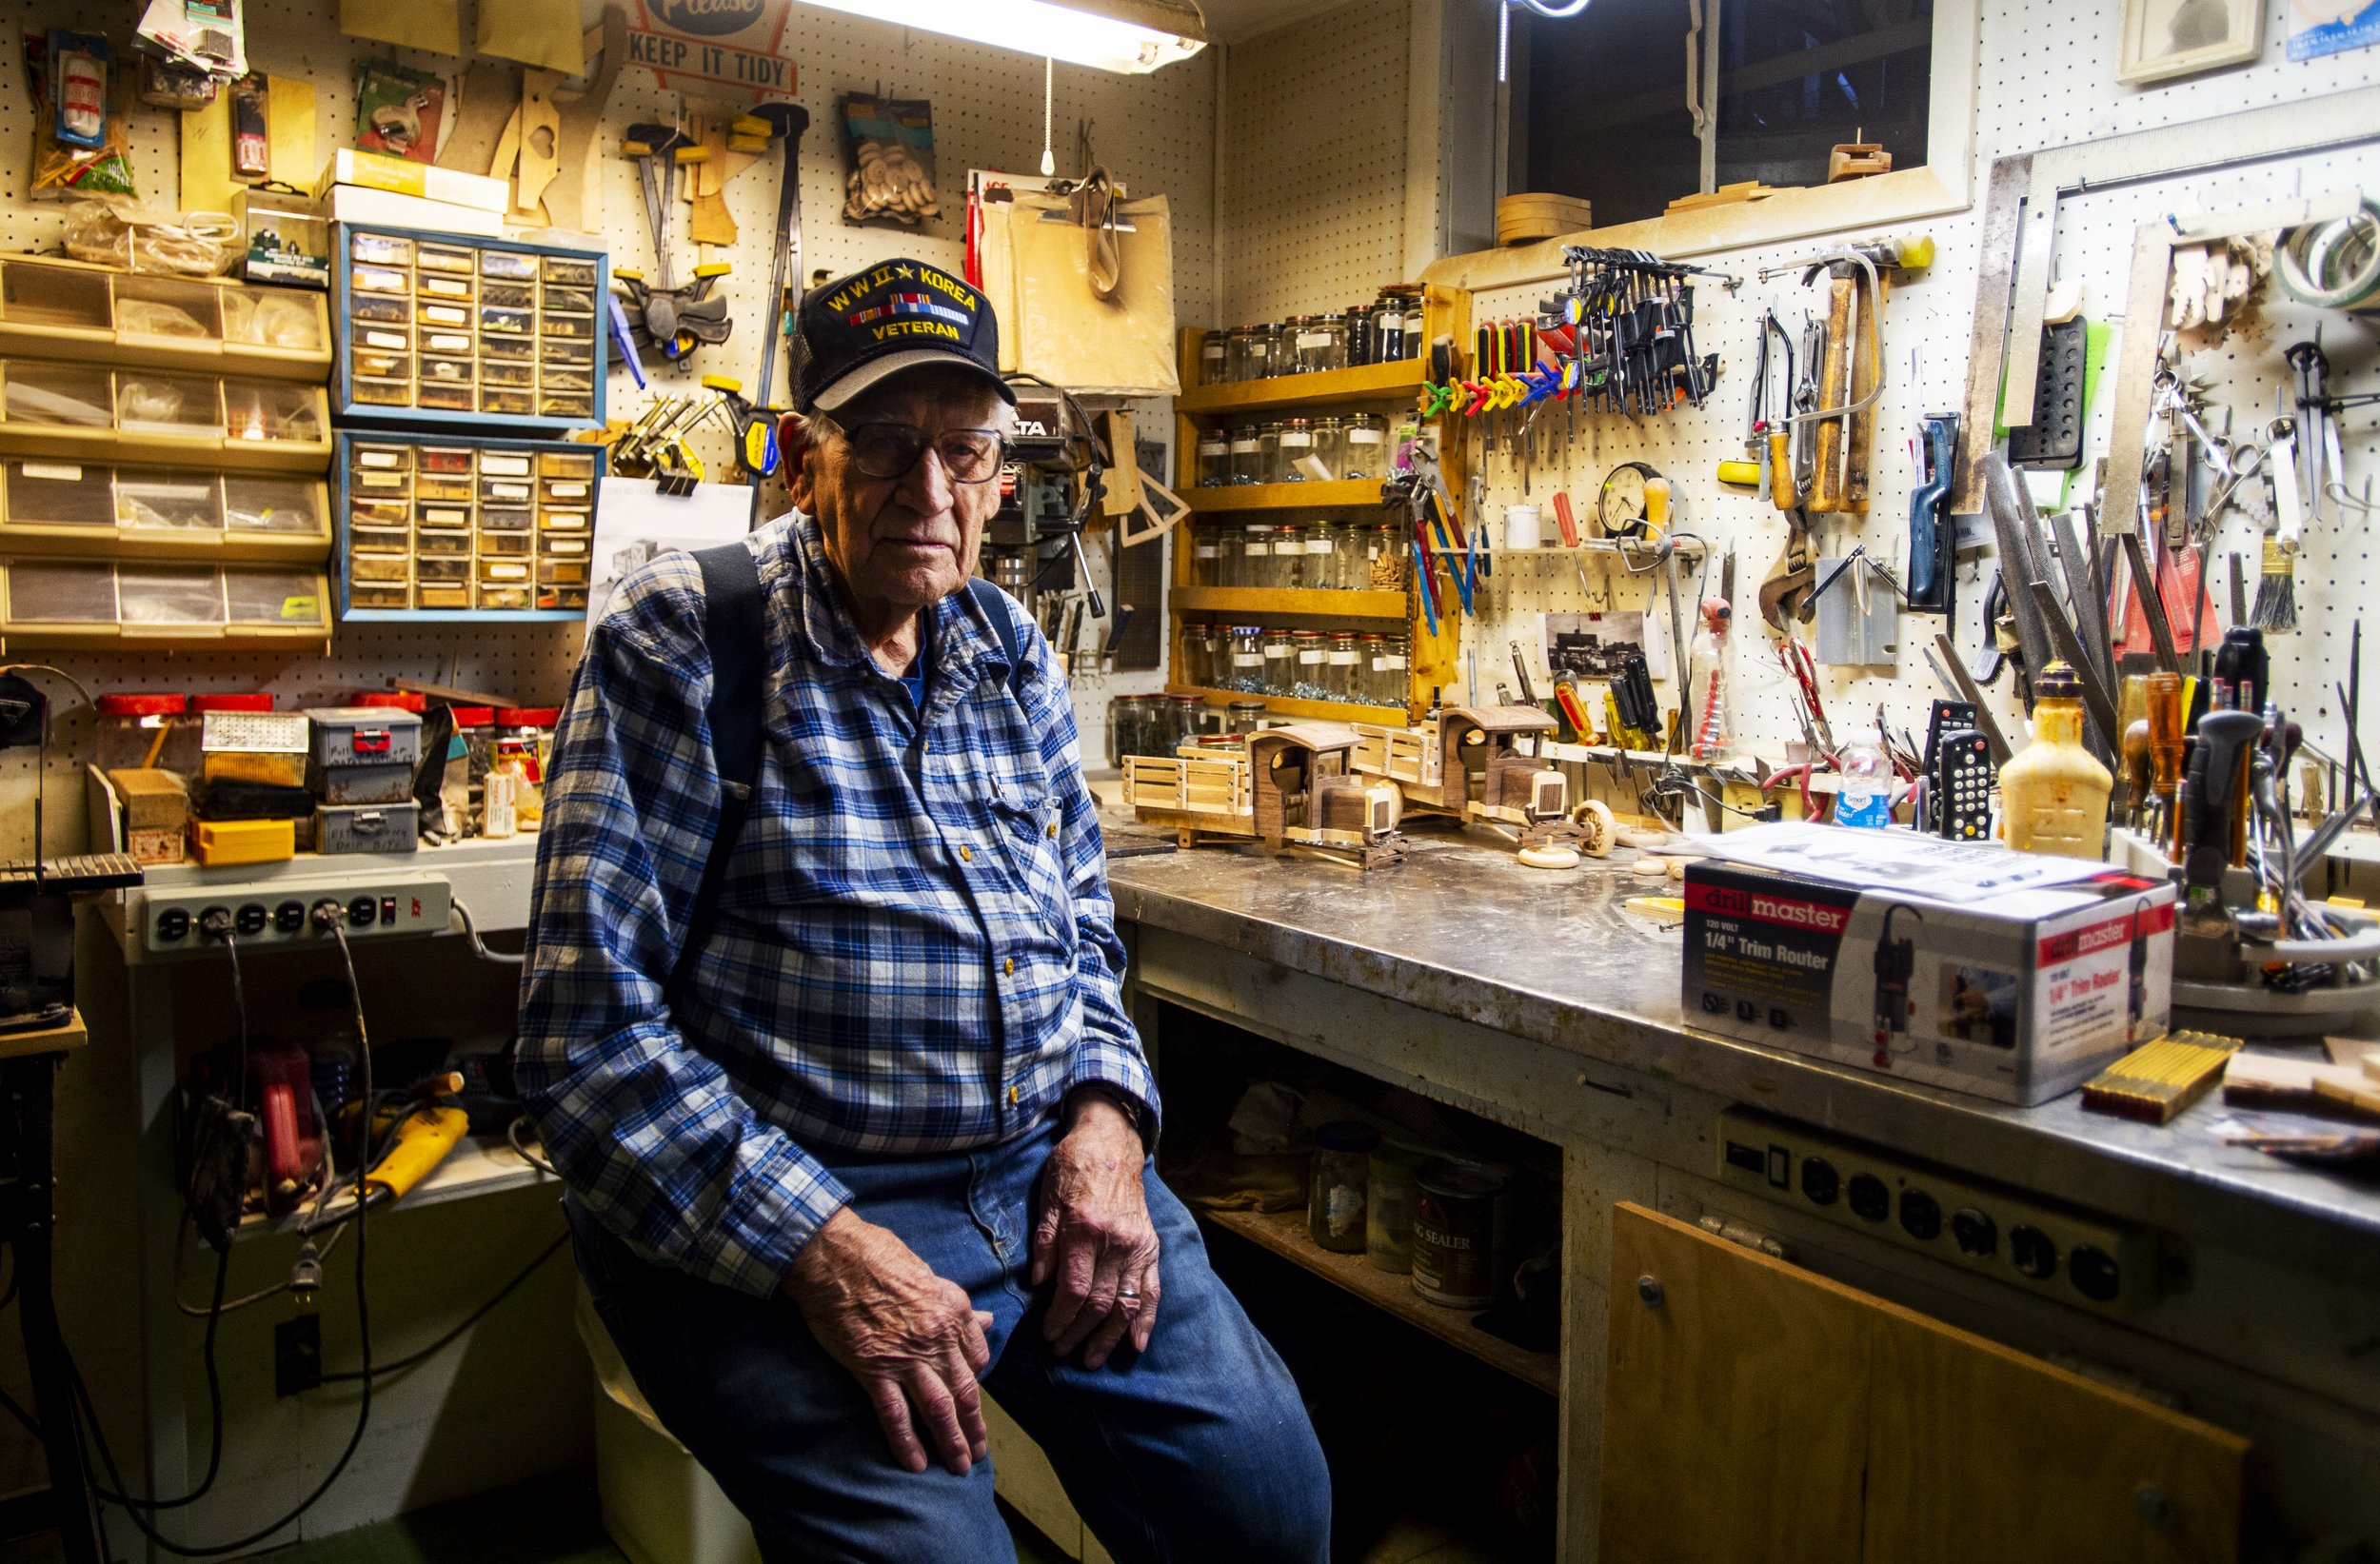  World War II veteran and woodworker Bill Vanaman poses for a portrait in his shop in the basement of his Colorado Springs home on December 3, 2019.  